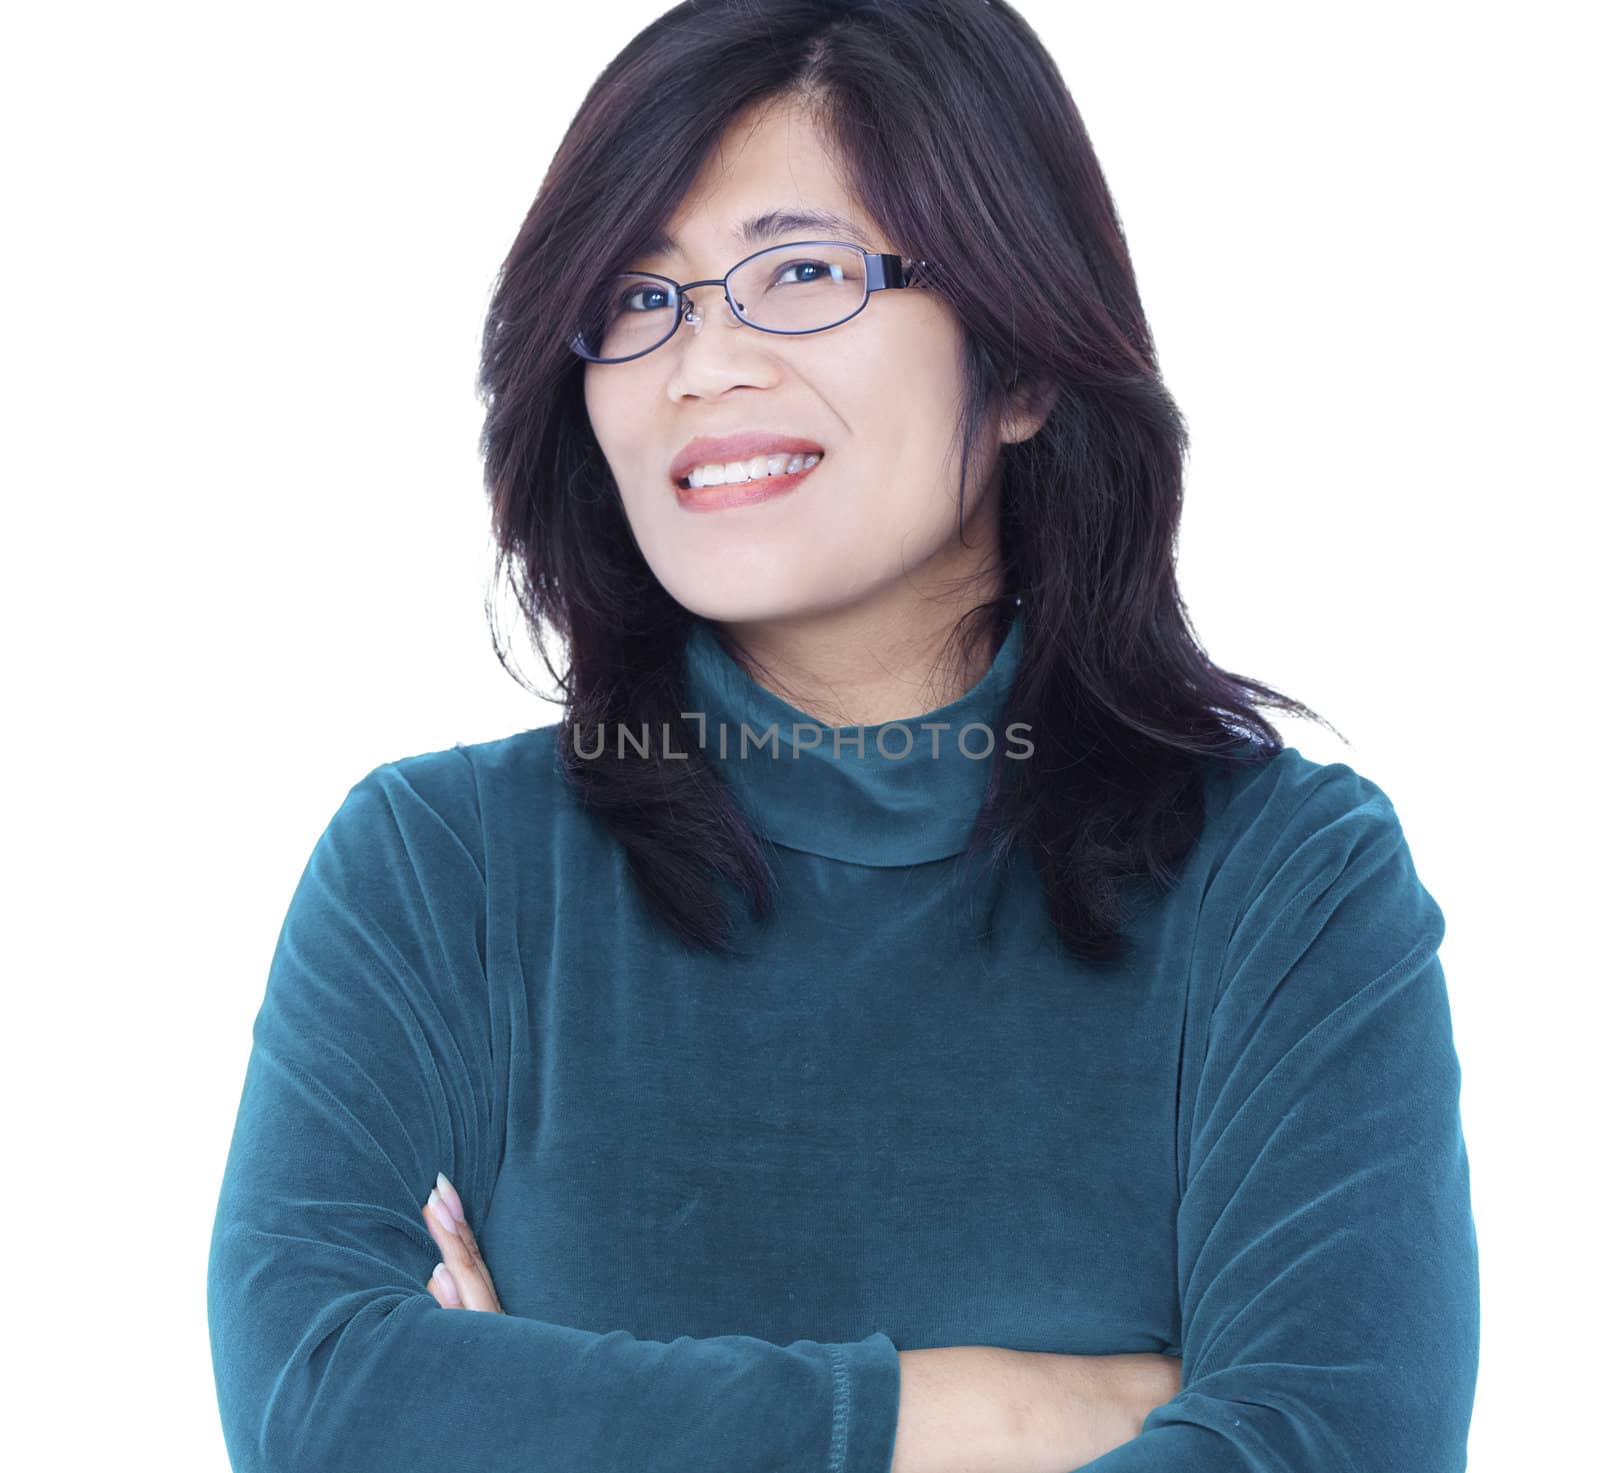 Confident smiling Asian female in green shirt, arms crossed by jarenwicklund